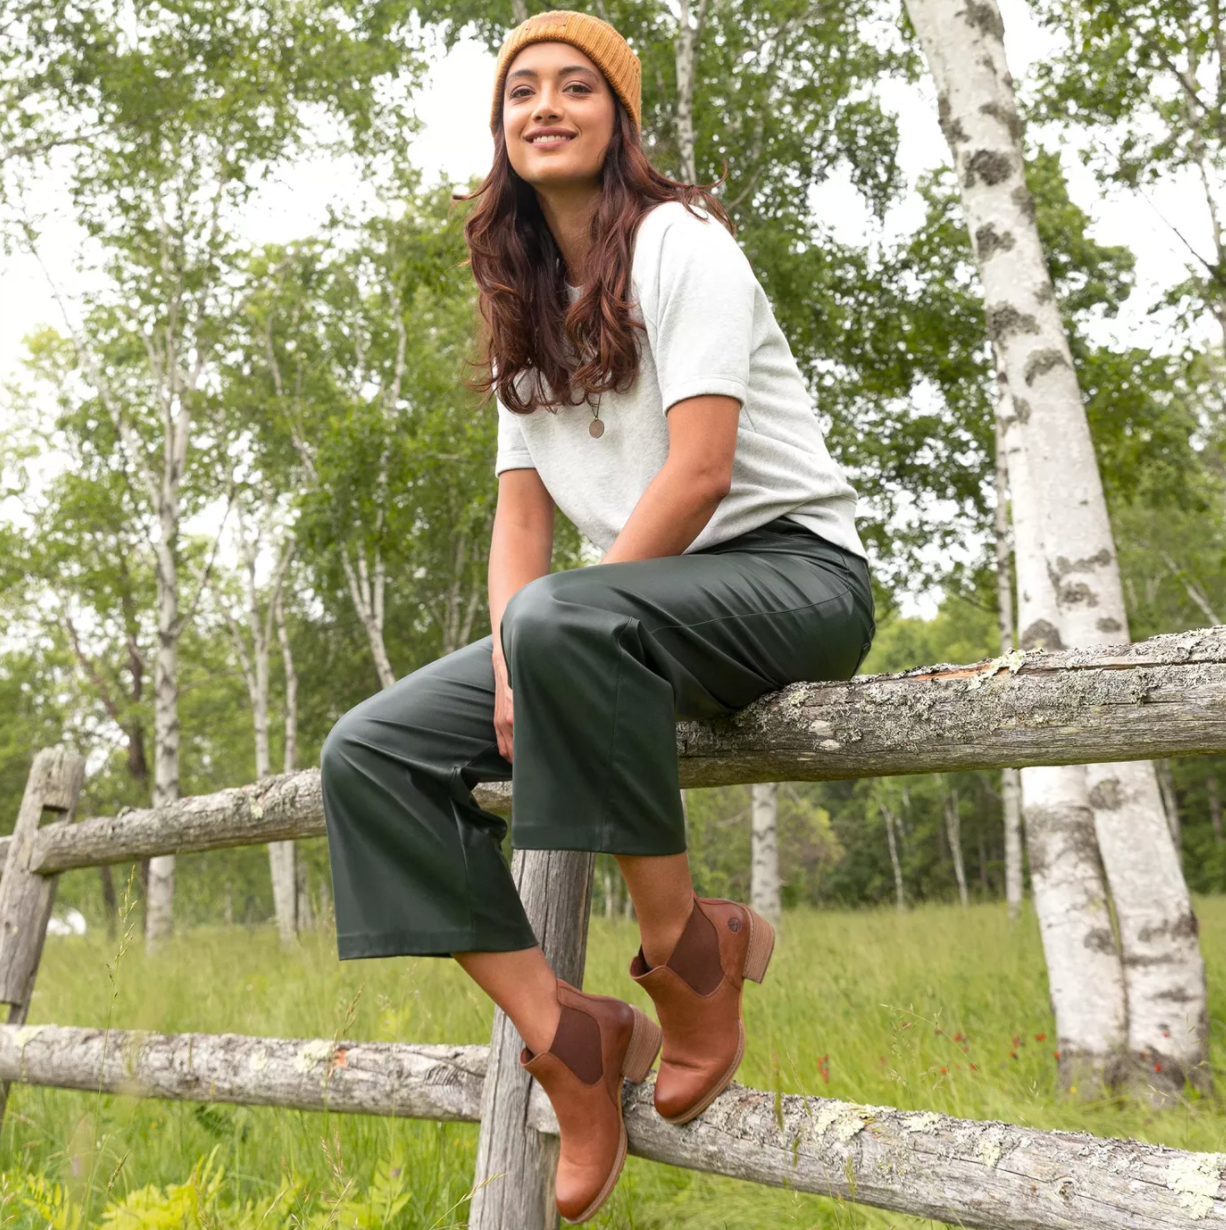 Model is wearing tan Chelsea boots while sitting on a wooden fence